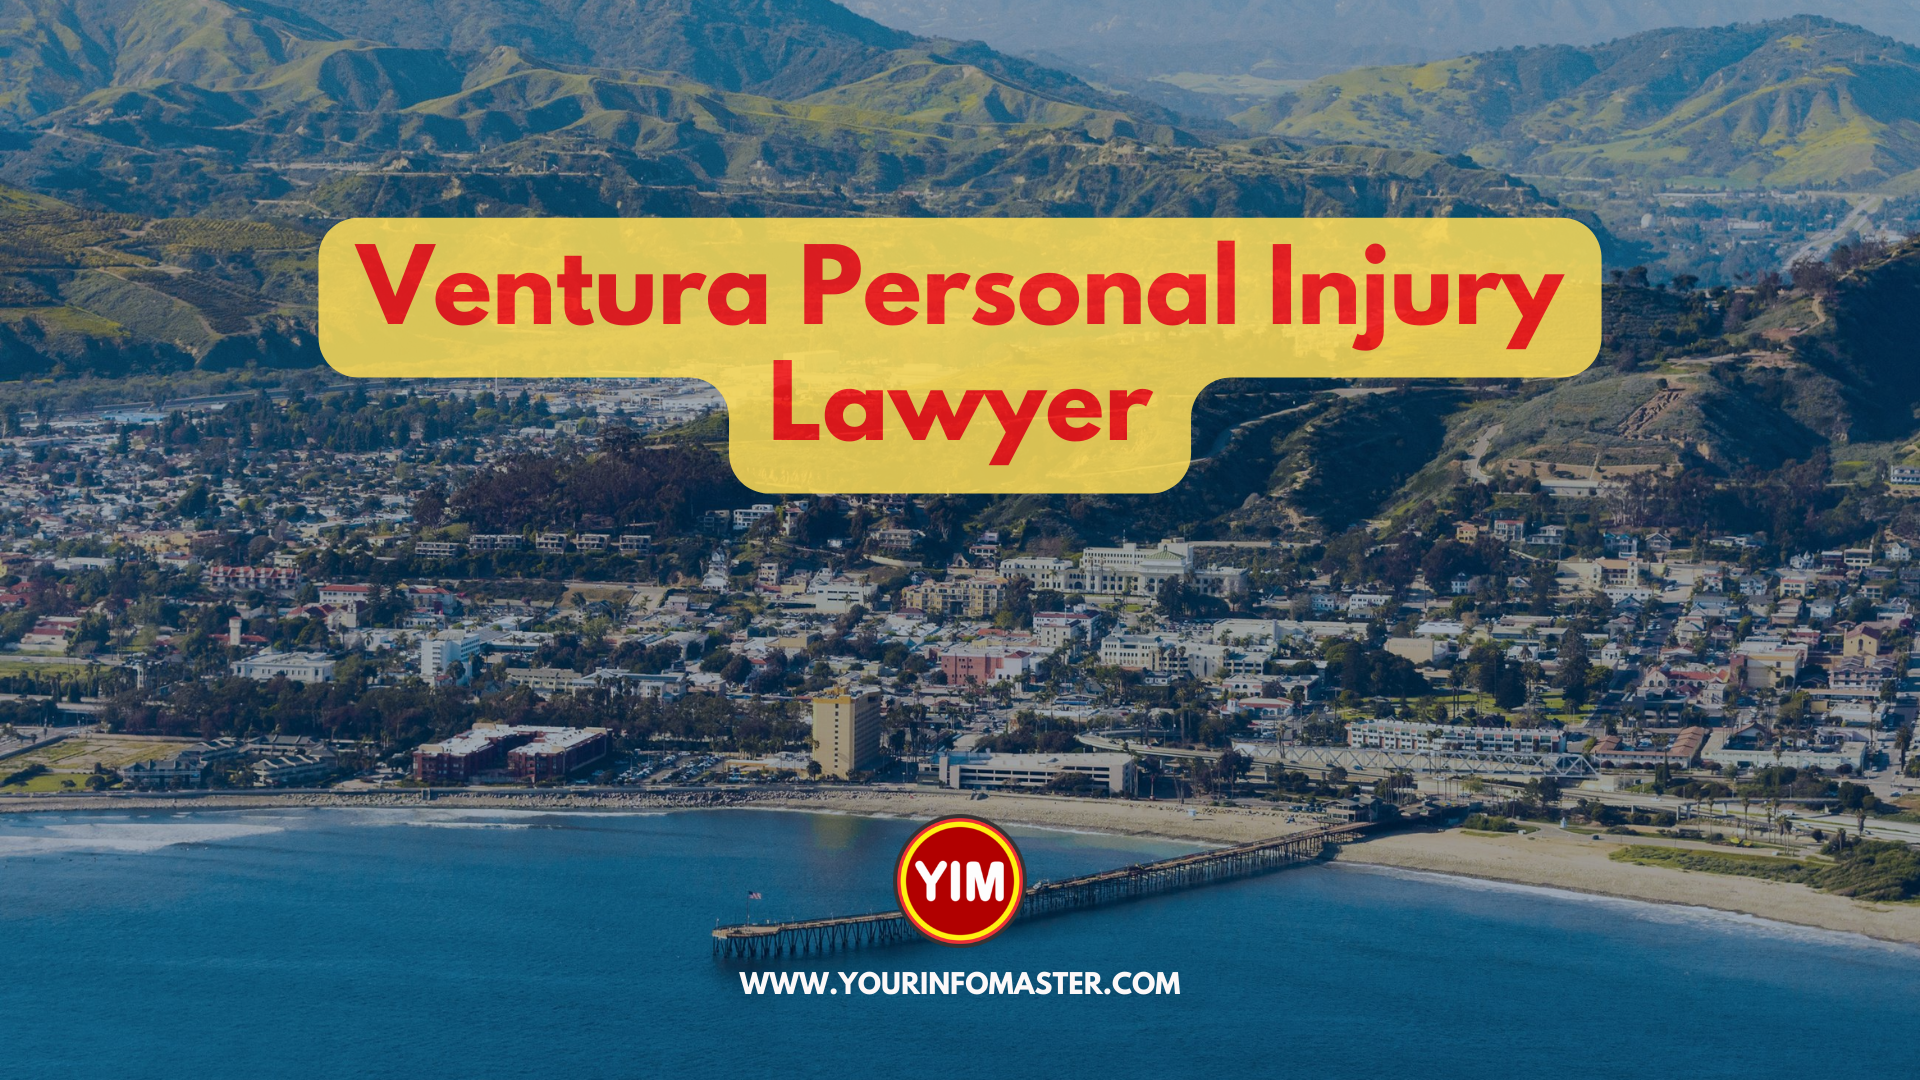 Ventura Personal Injury Lawyer Accident Attorneys, Info Gallery, Information, Marketing, Personal Injury Lawyer